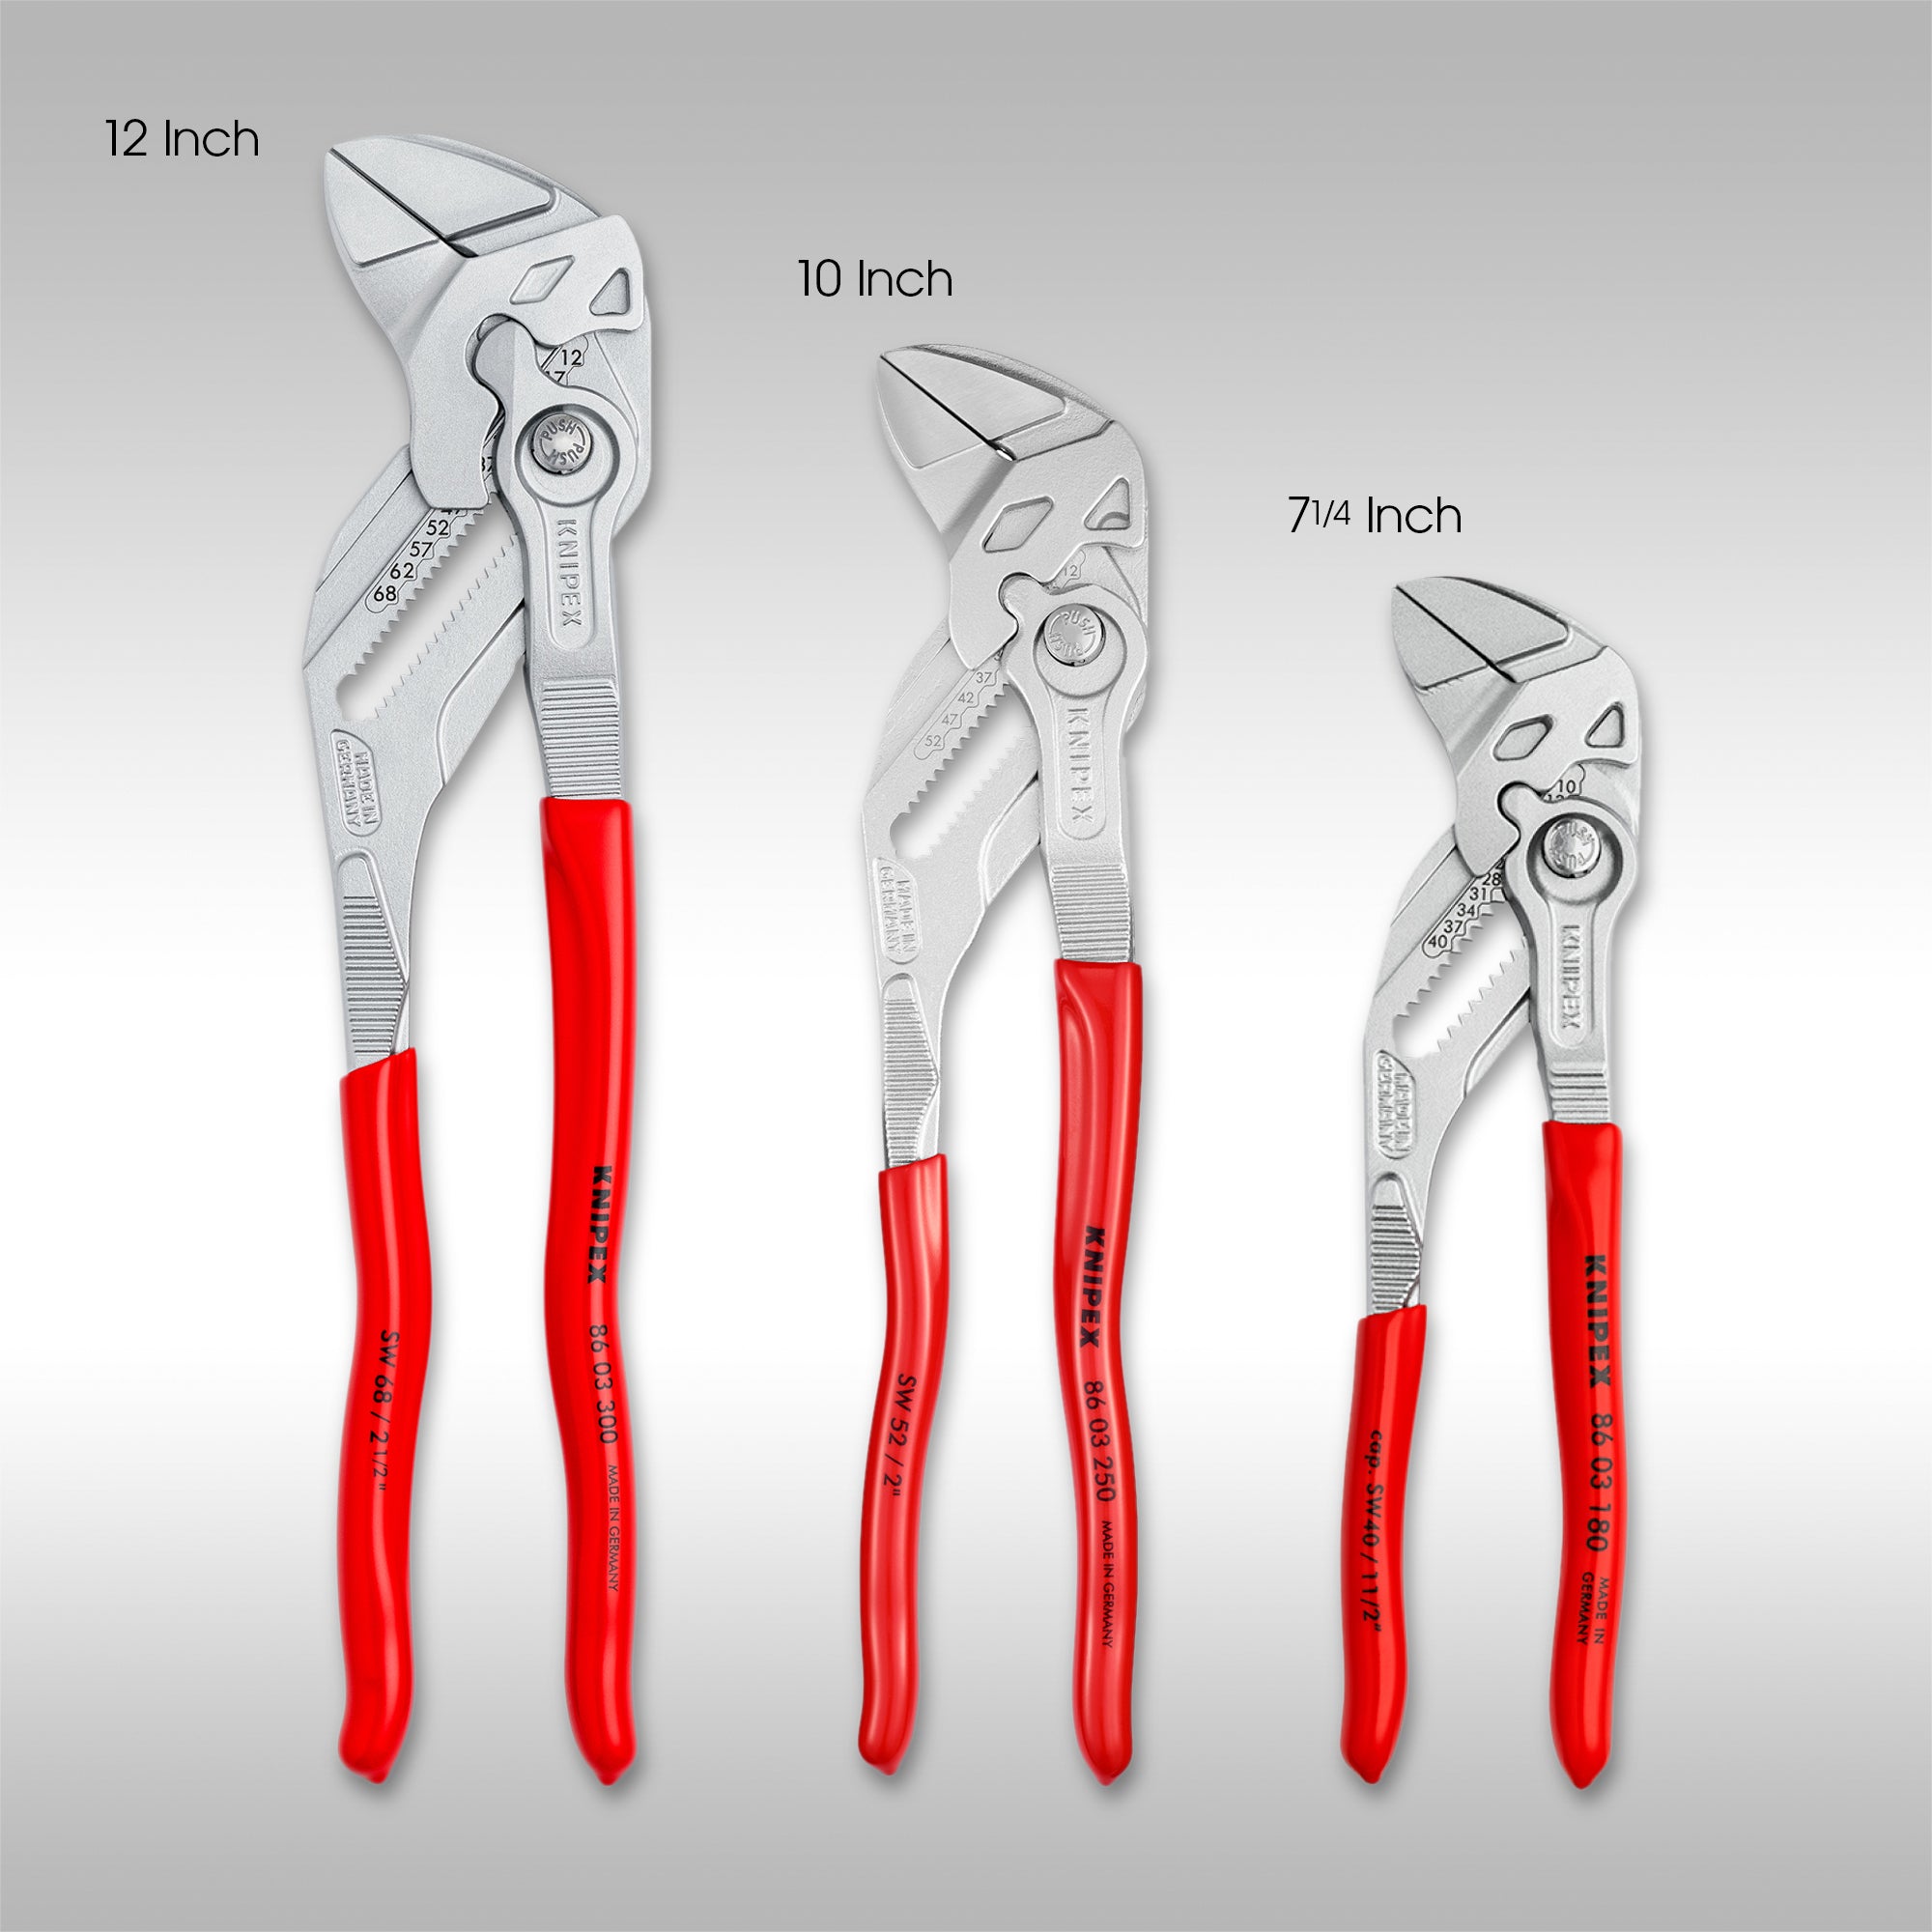 KNIPEX - 3PC PLIERS WRENCH SET - 7 1/4, 10, 12 - Upshift Online Inc.